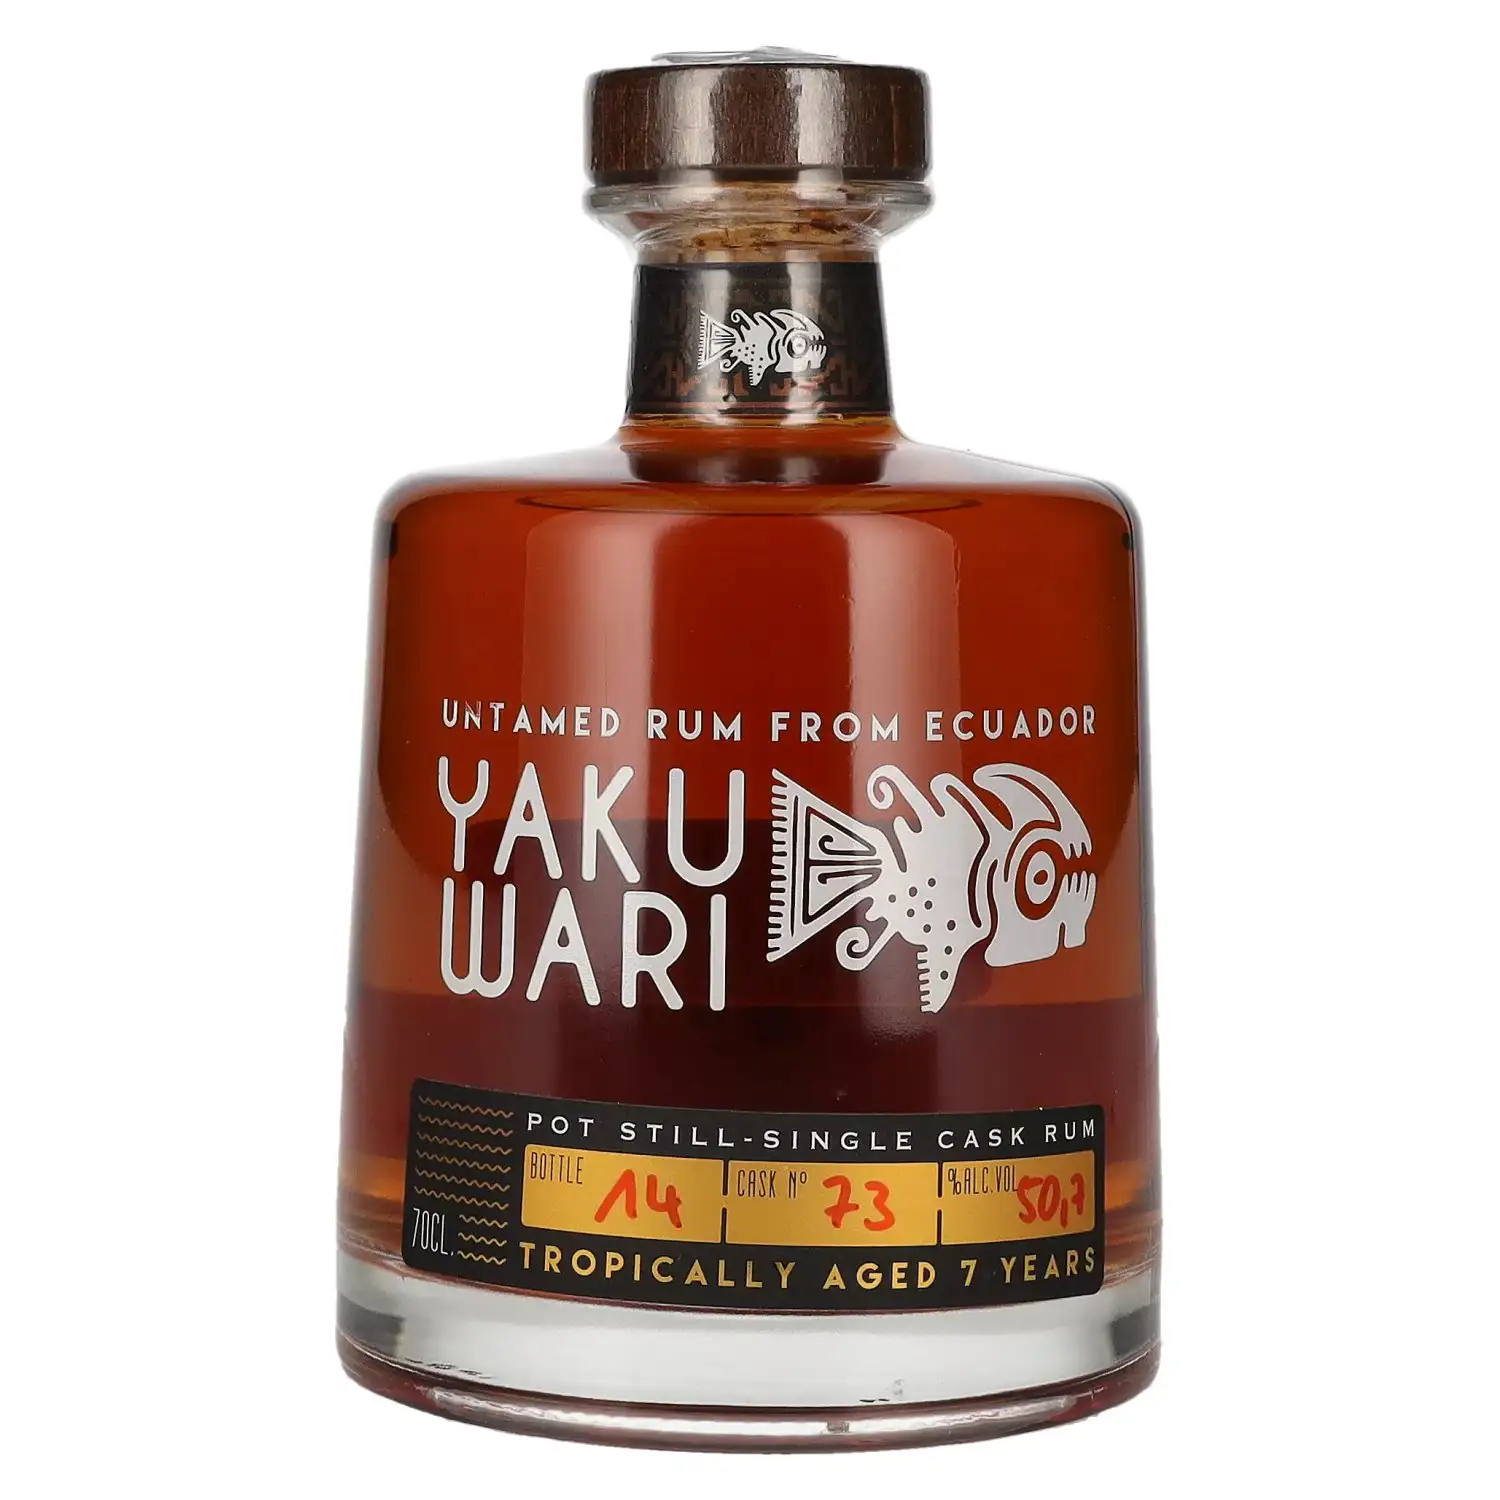 Image of the front of the bottle of the rum Yaku Wari Untamed Rum from Ecuador